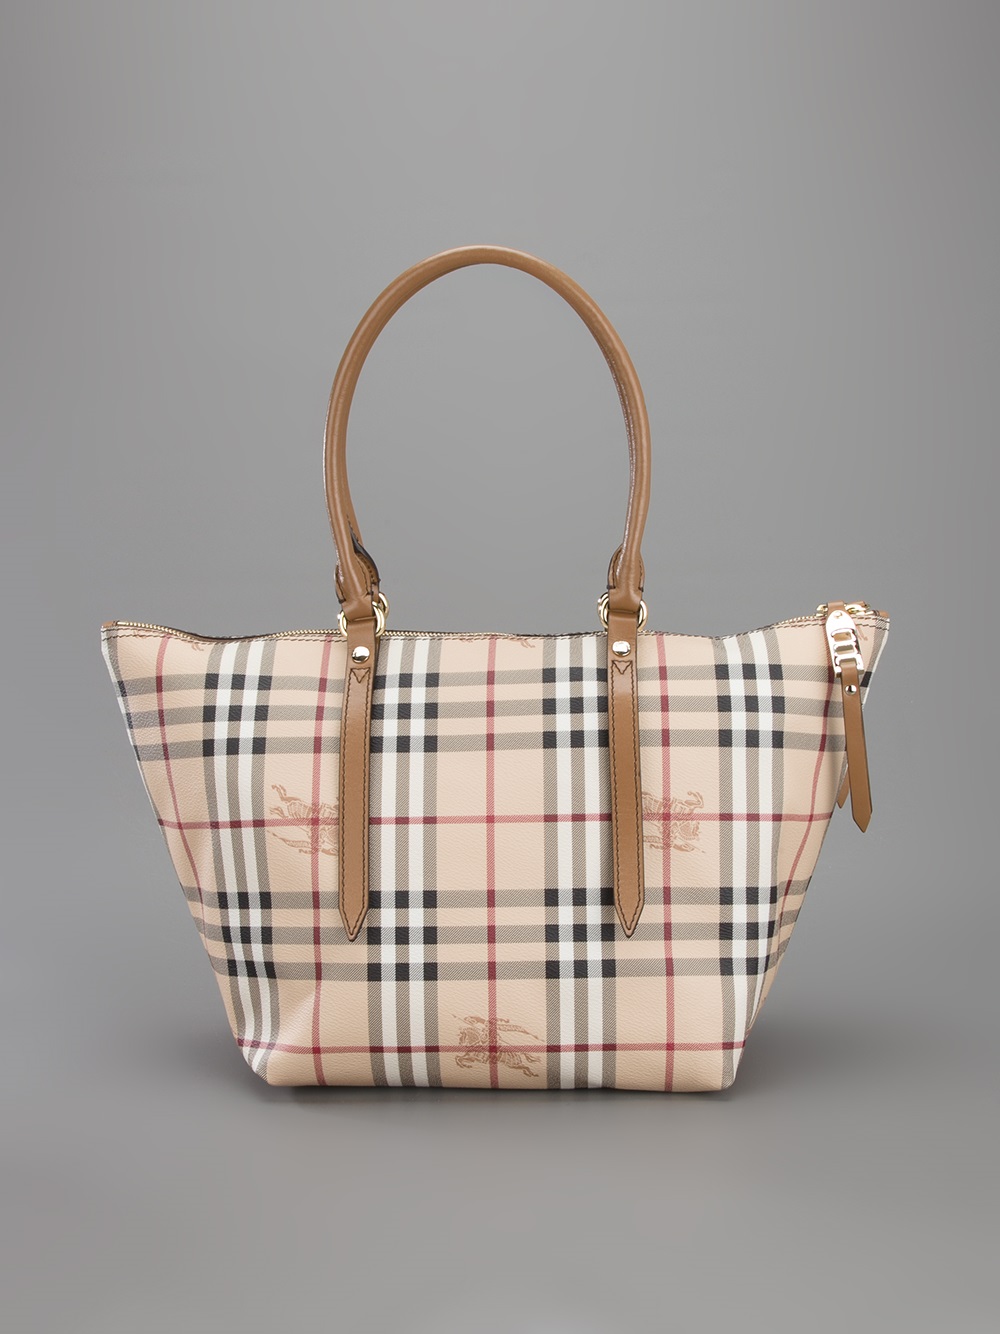 Lyst - Burberry Salisbury Shopper Tote in Natural